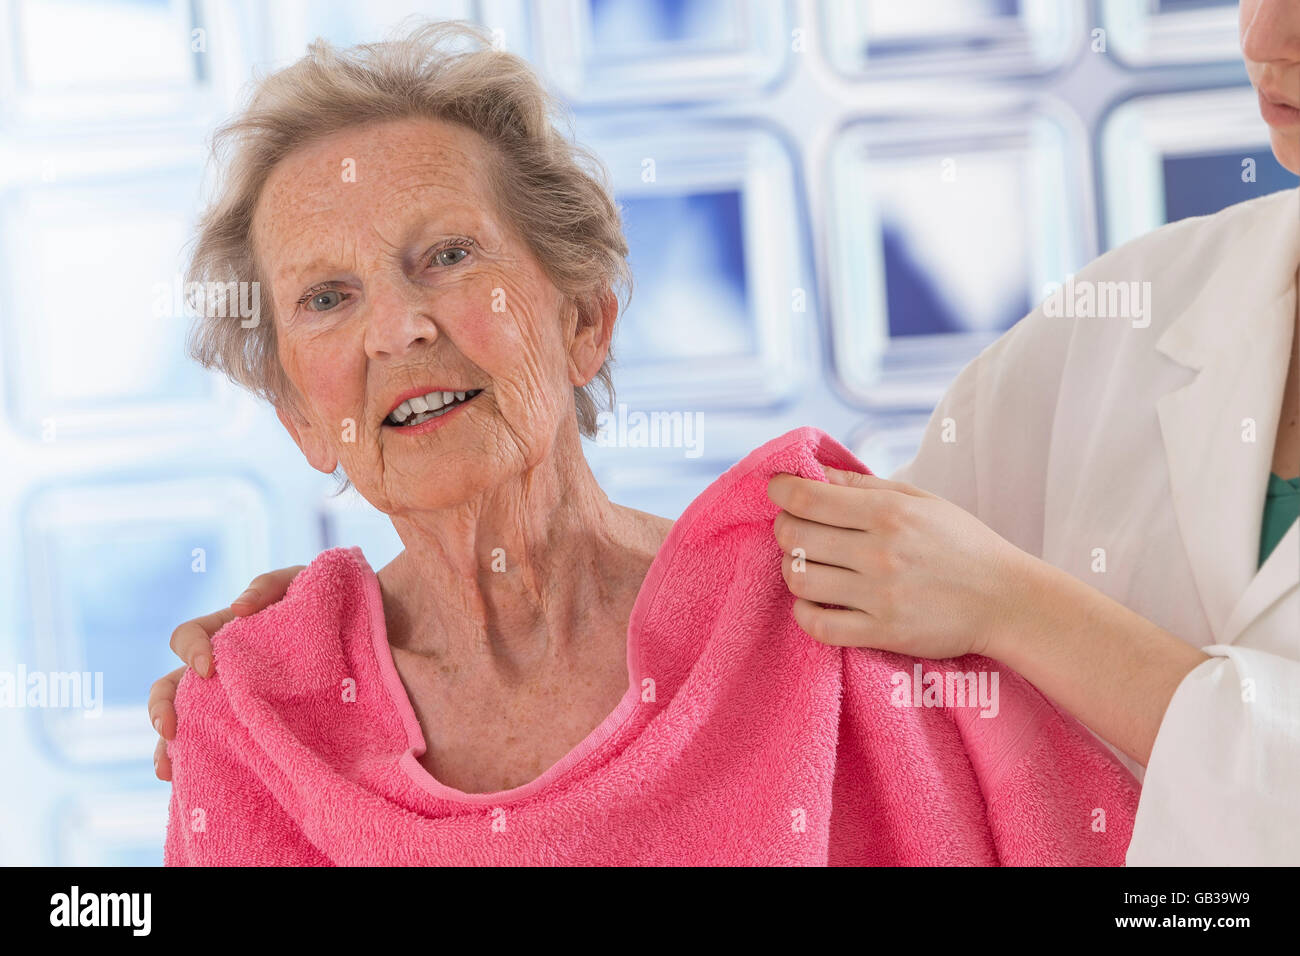 Care giver or nurse assisting elderly woman for shower Stock Photo